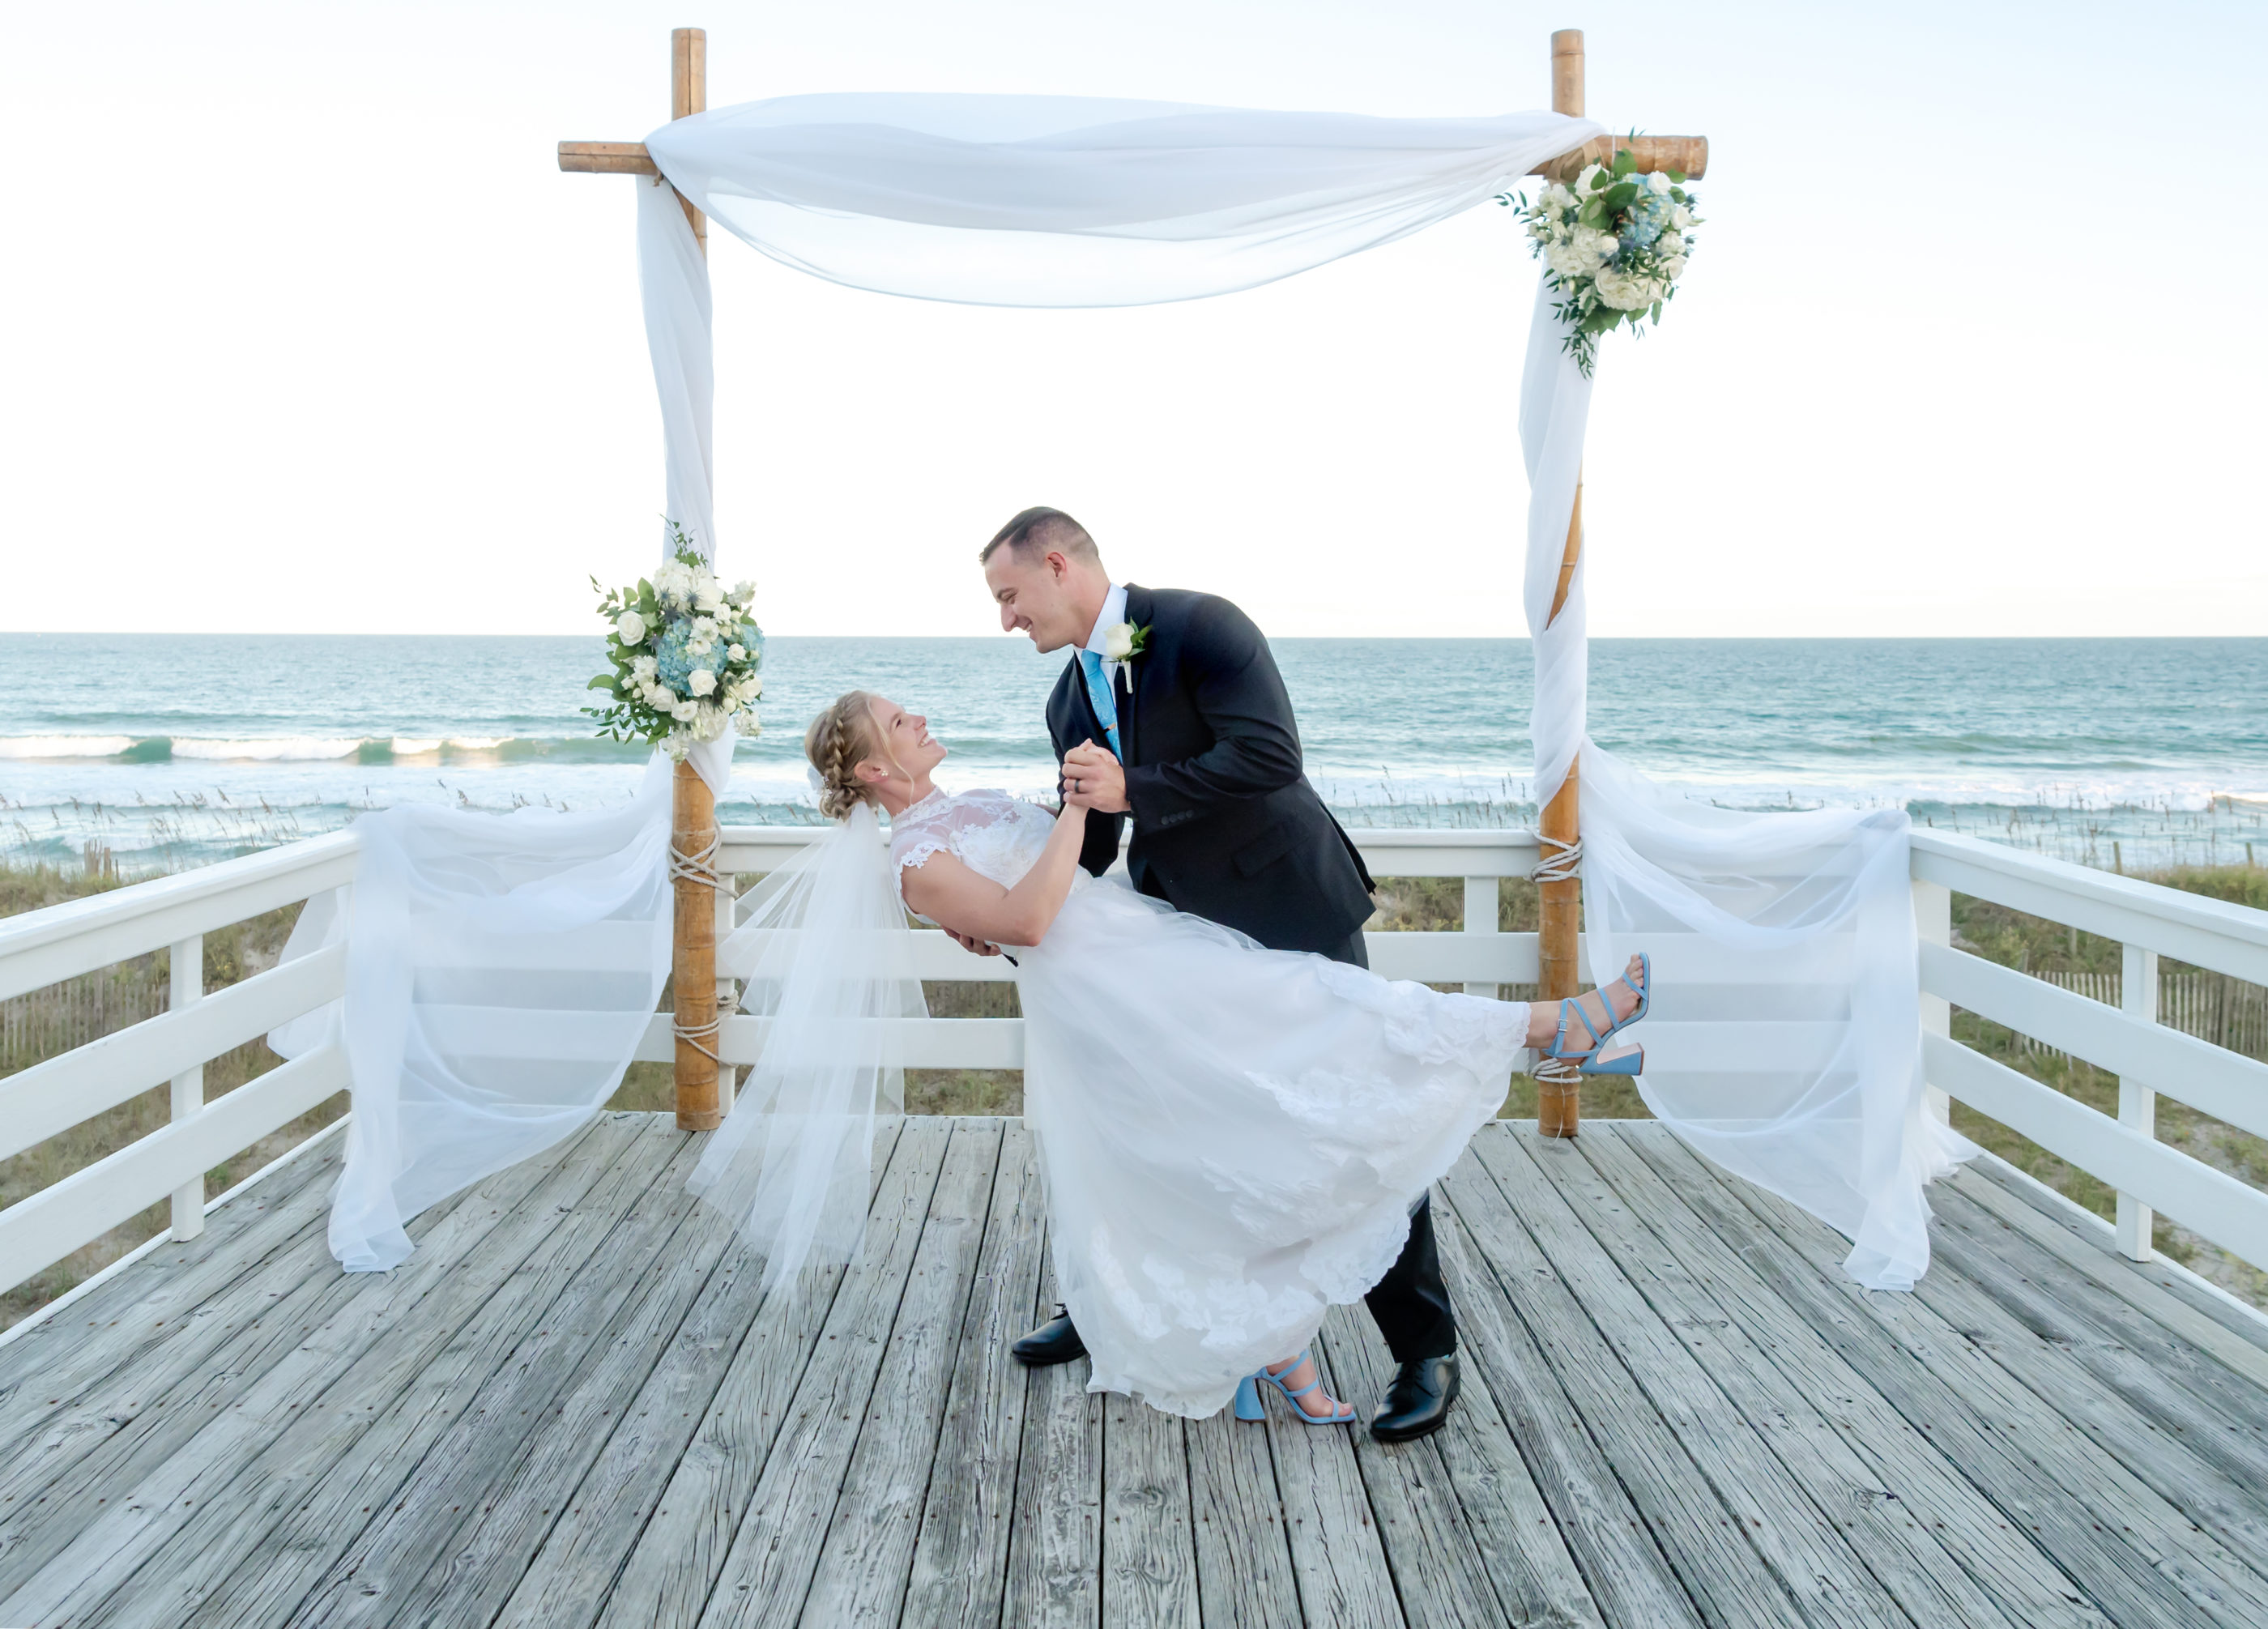 Groom dipping bride on a deck at the beach.